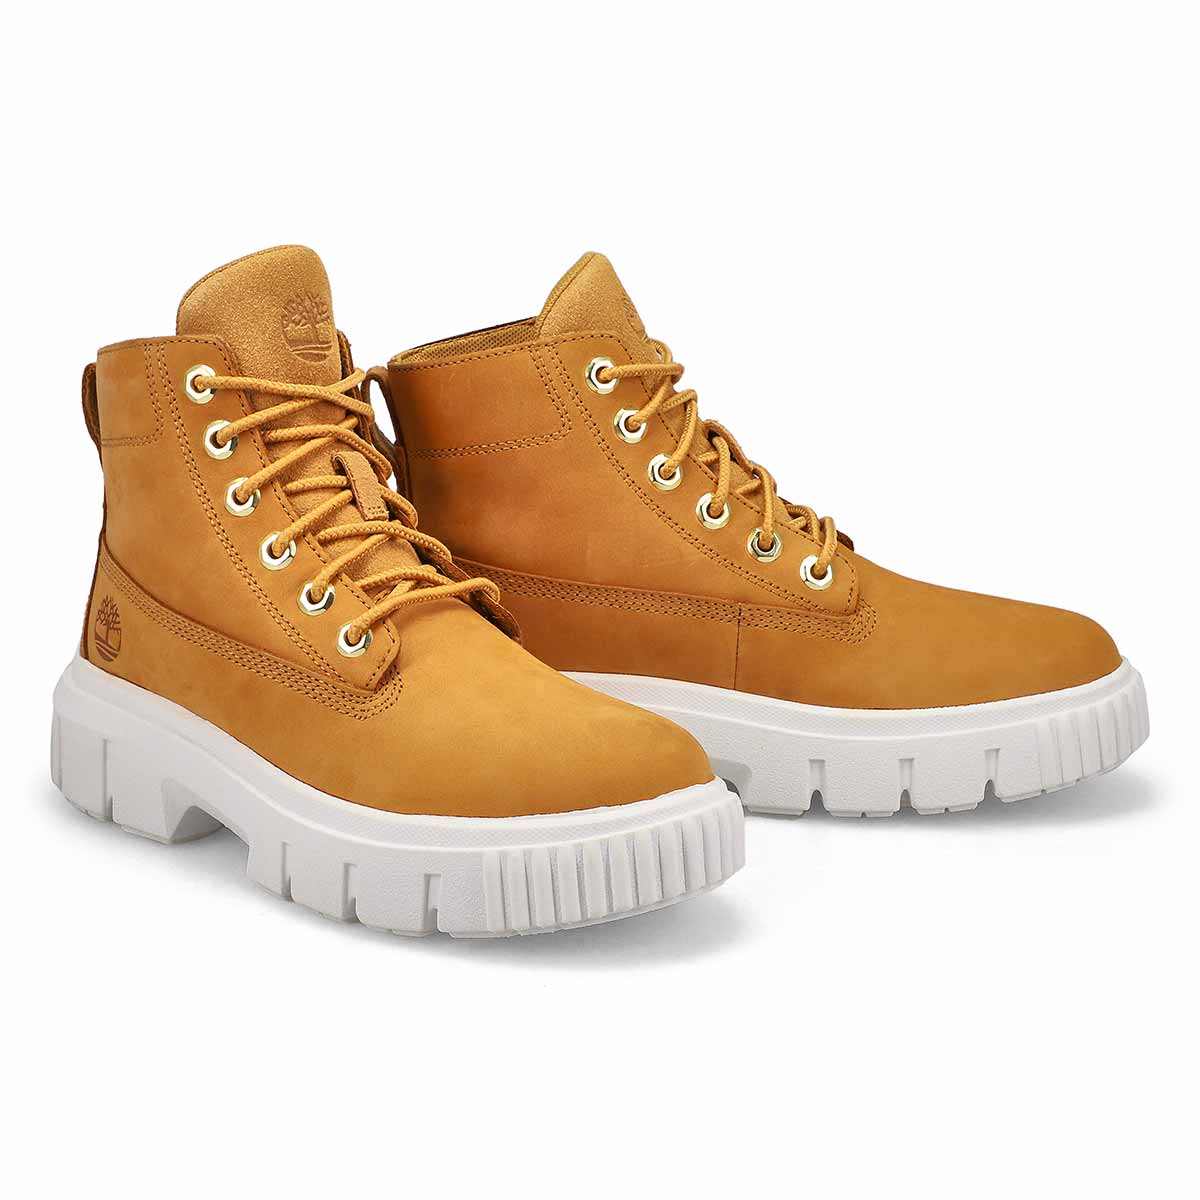 Women's Greyfield Lace Up Boot - Wheat